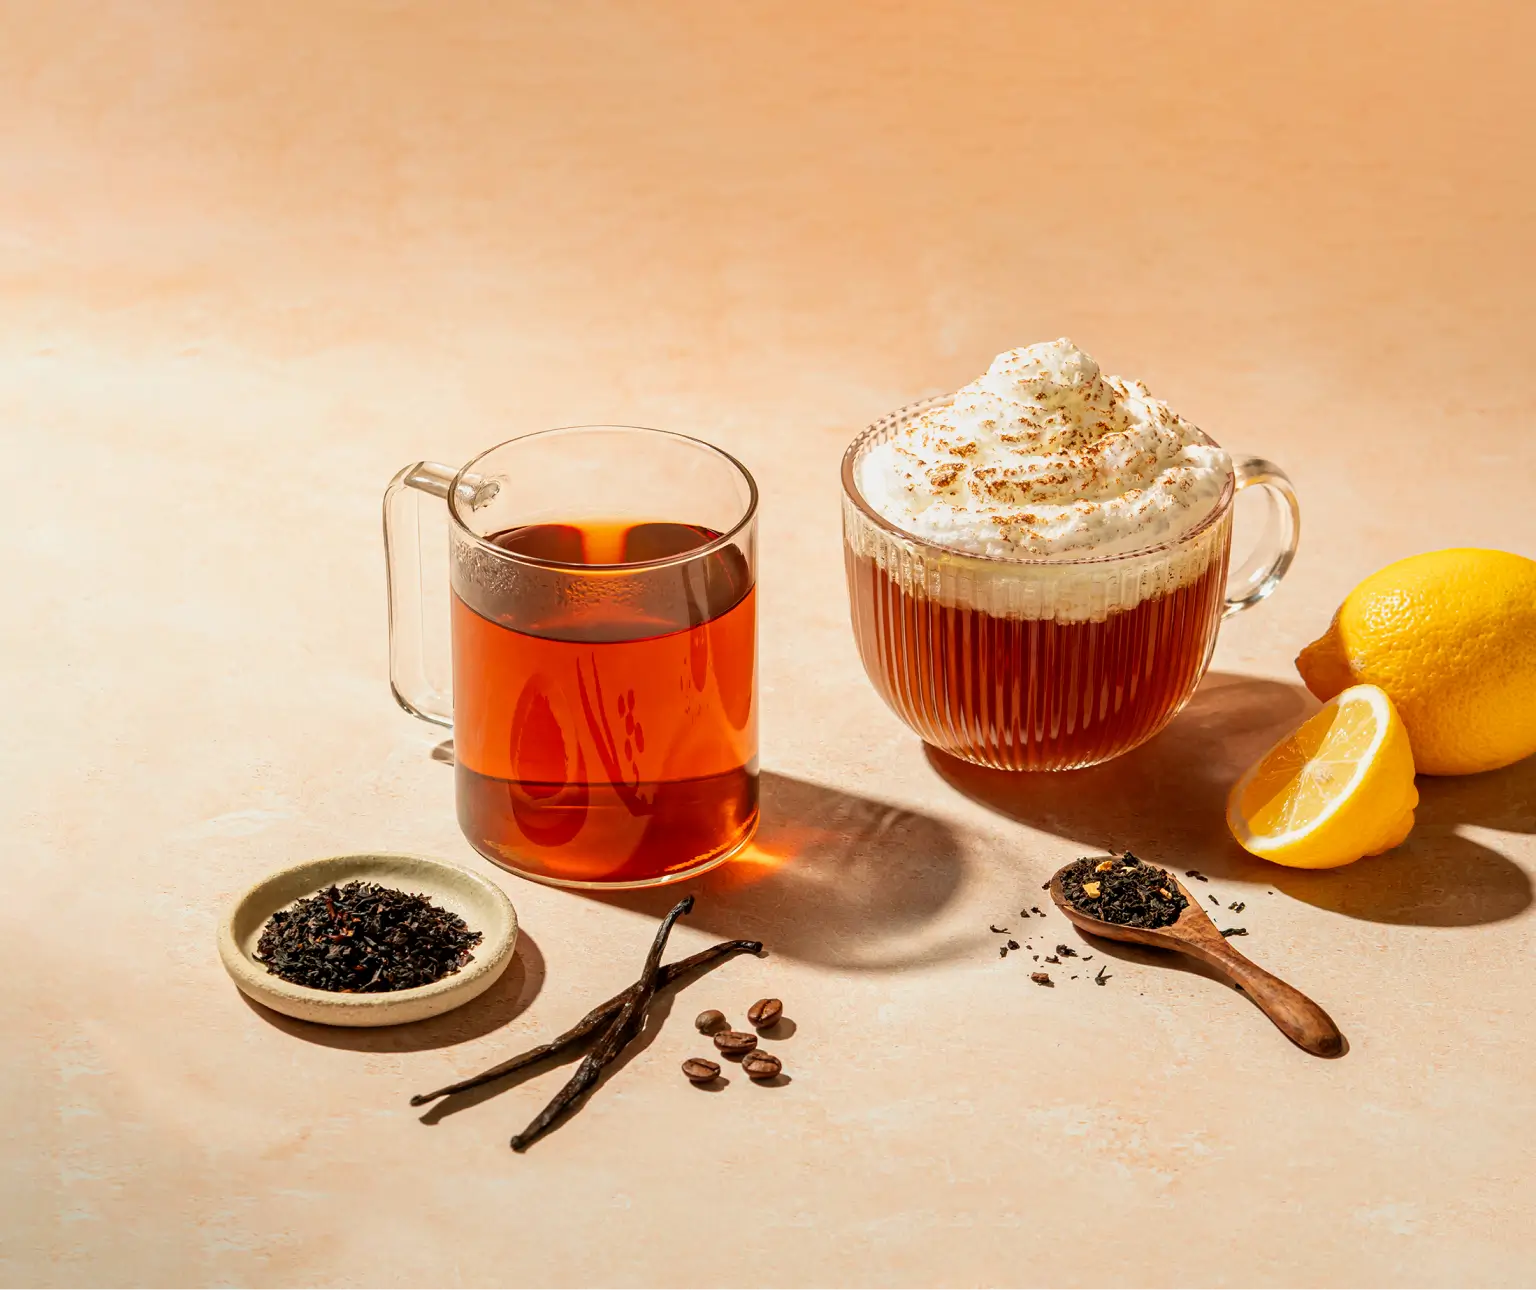 Click on "Discover now" to discover our gourmet teas